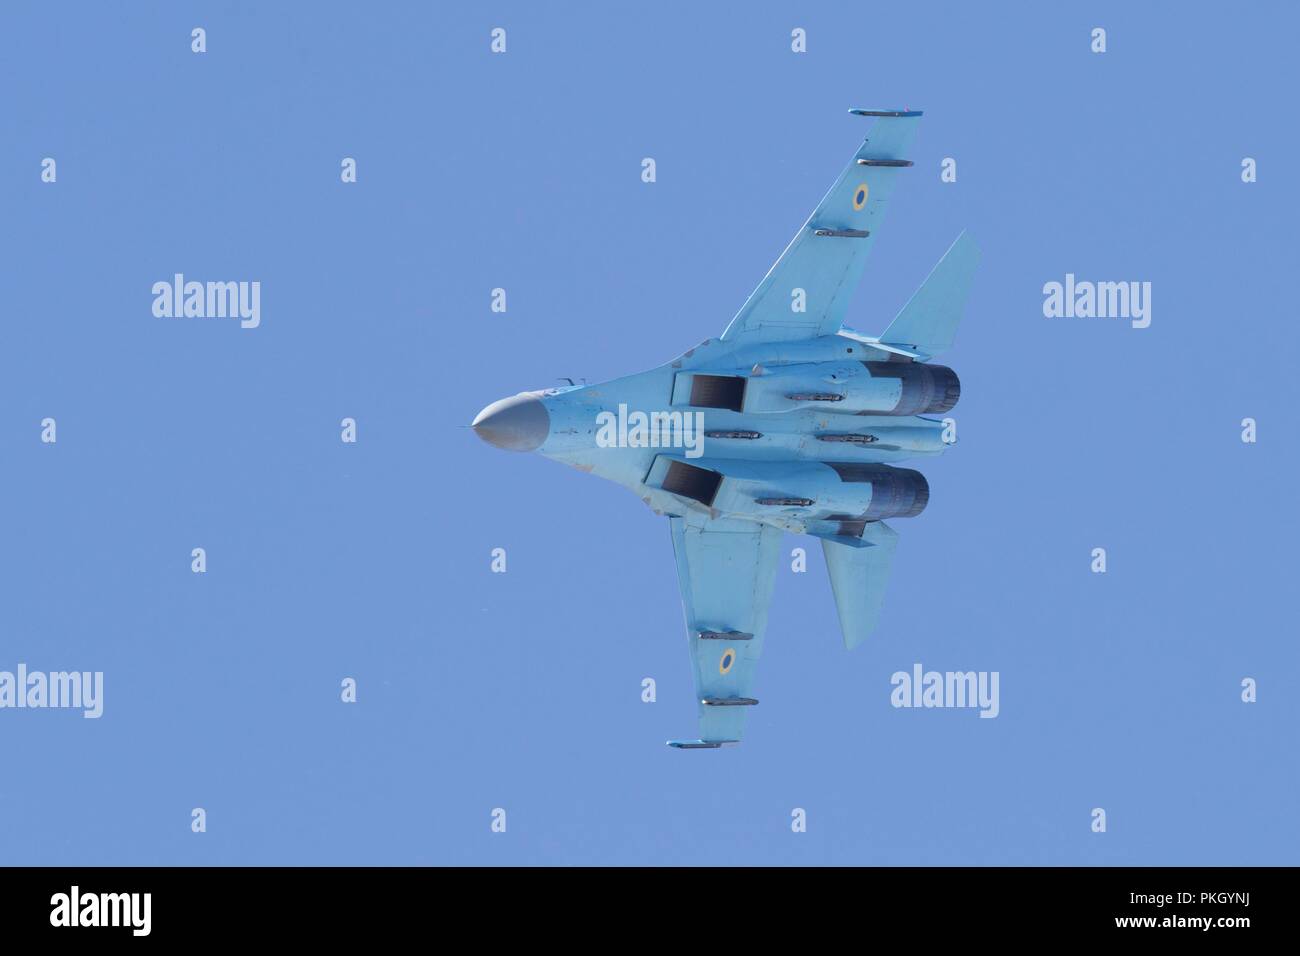 Ukrainian Air Force - Sukhoi Su-27 fighter jet codenamed 'Flanker' by NATO Stock Photo